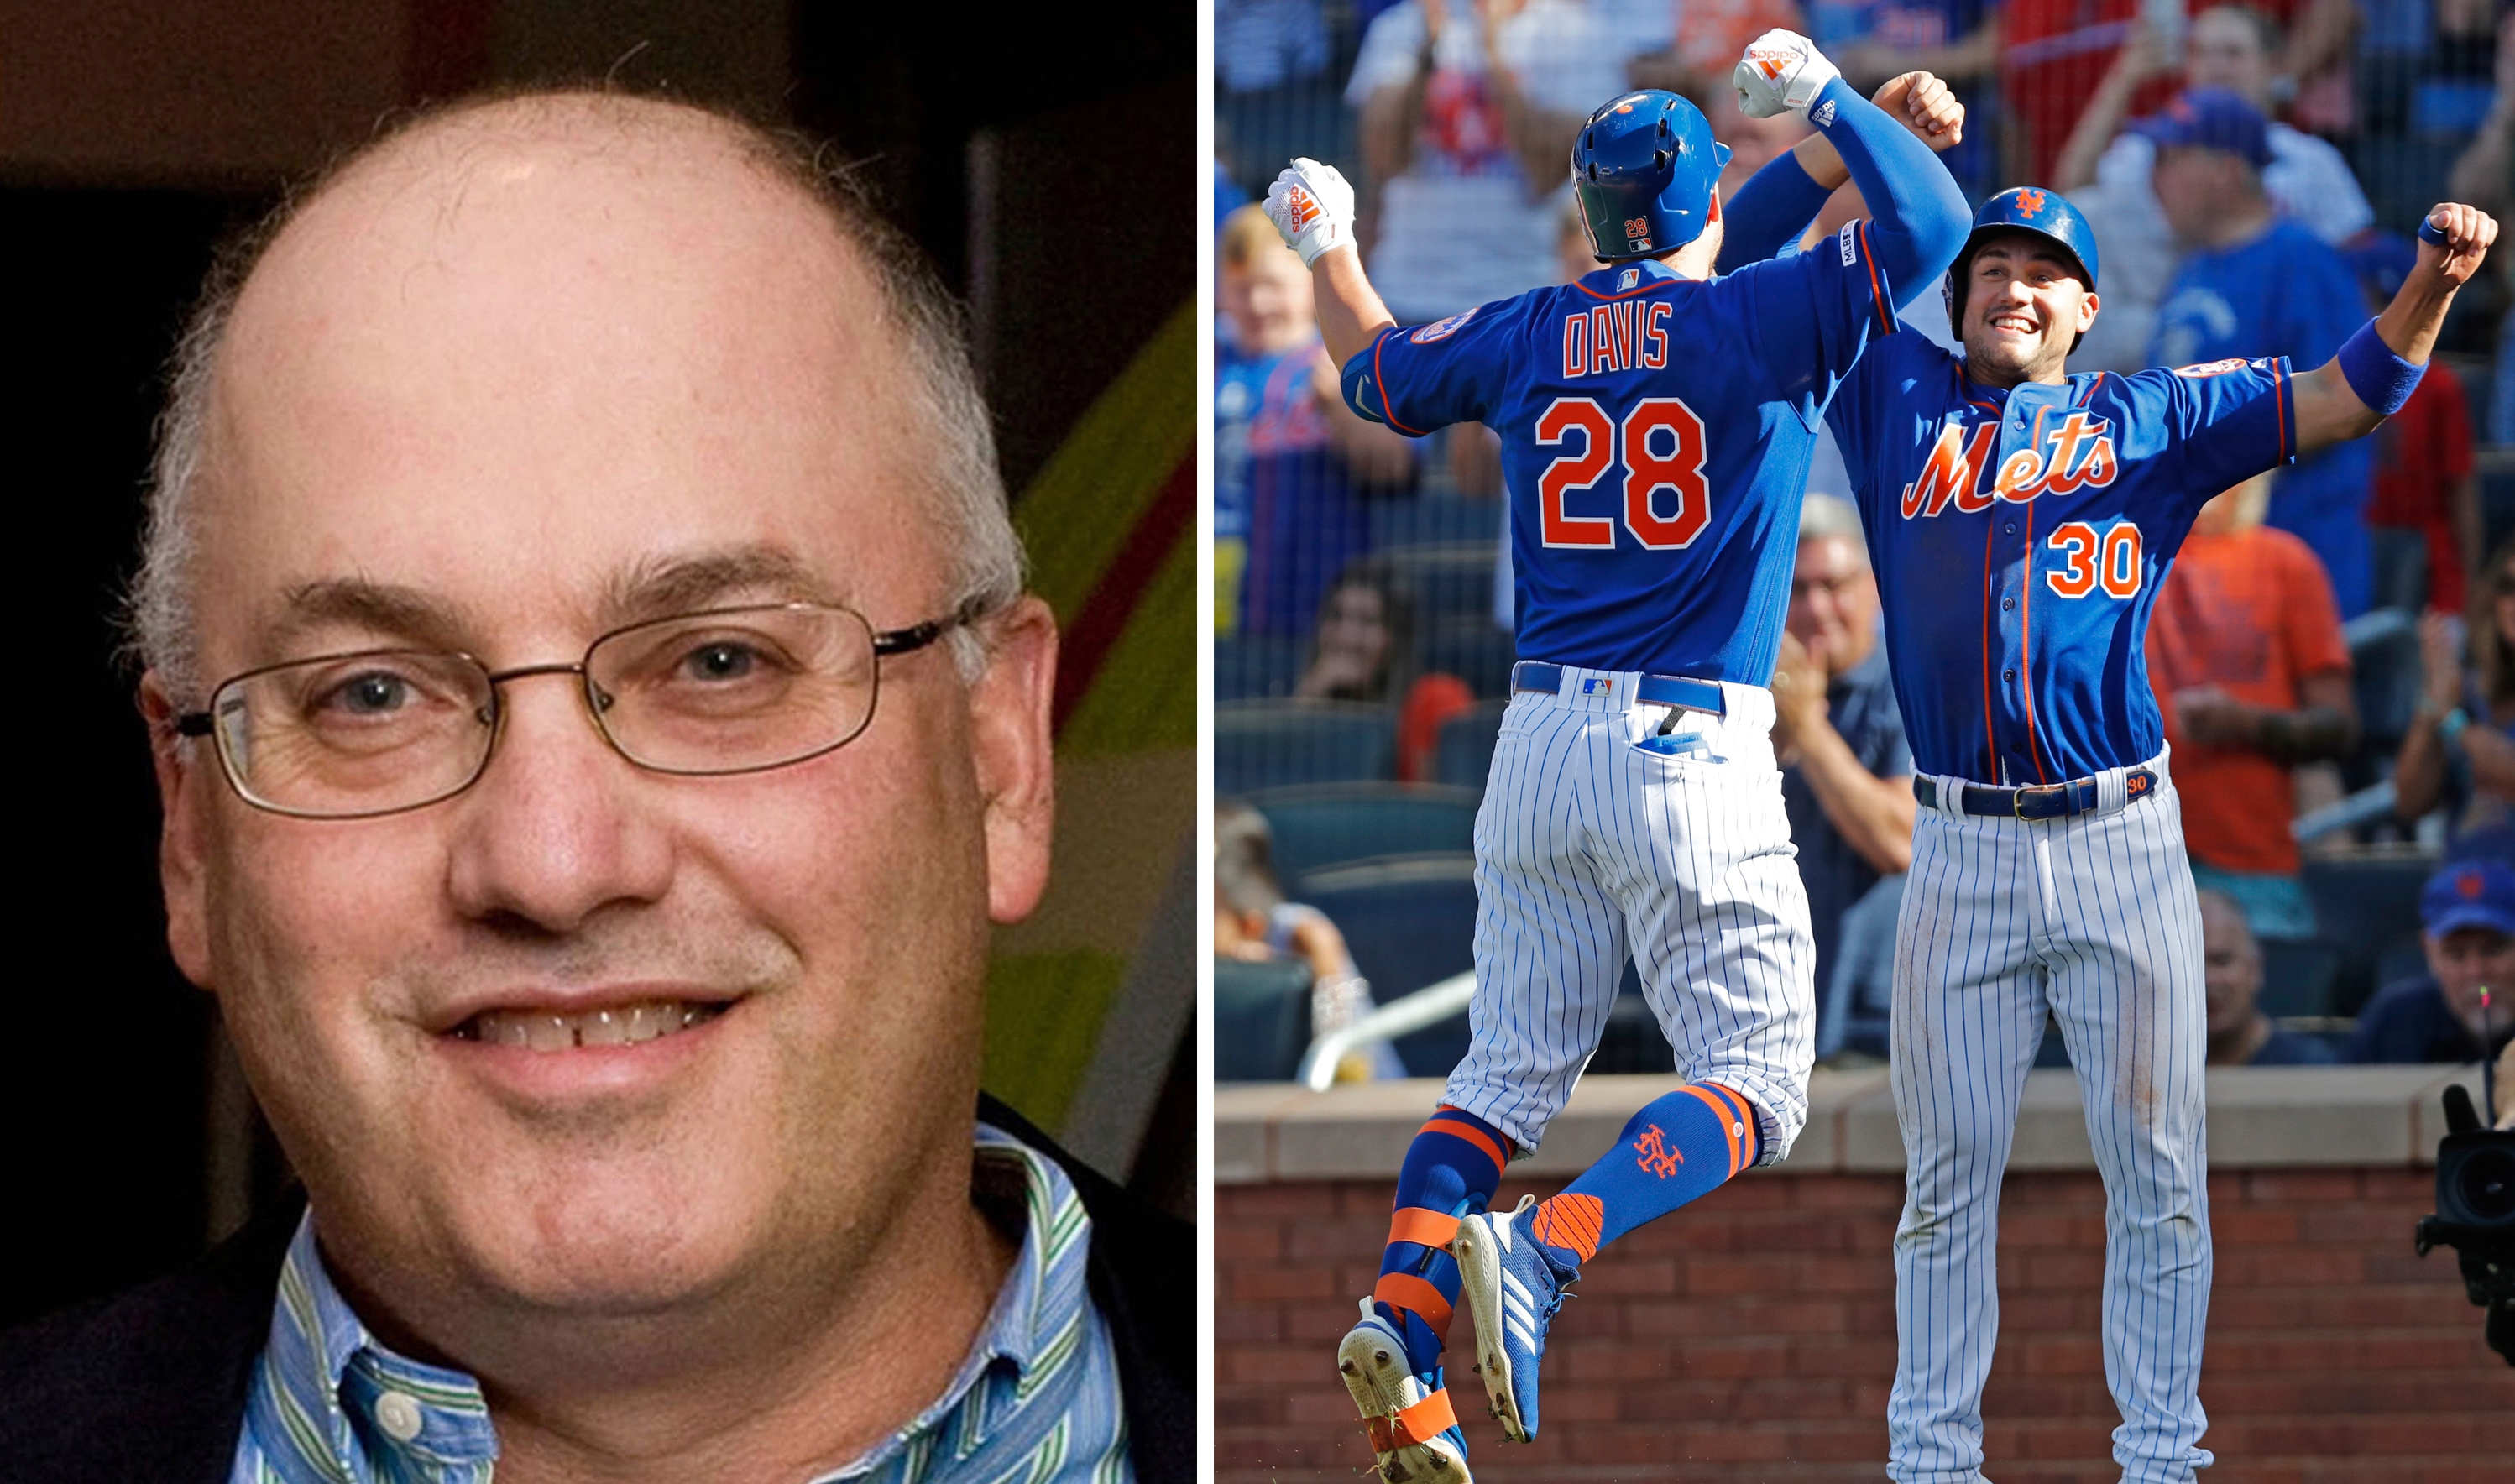 Mets to have new owner as billionaire Steve Cohen agrees to buy franchise  from Wilpon family 